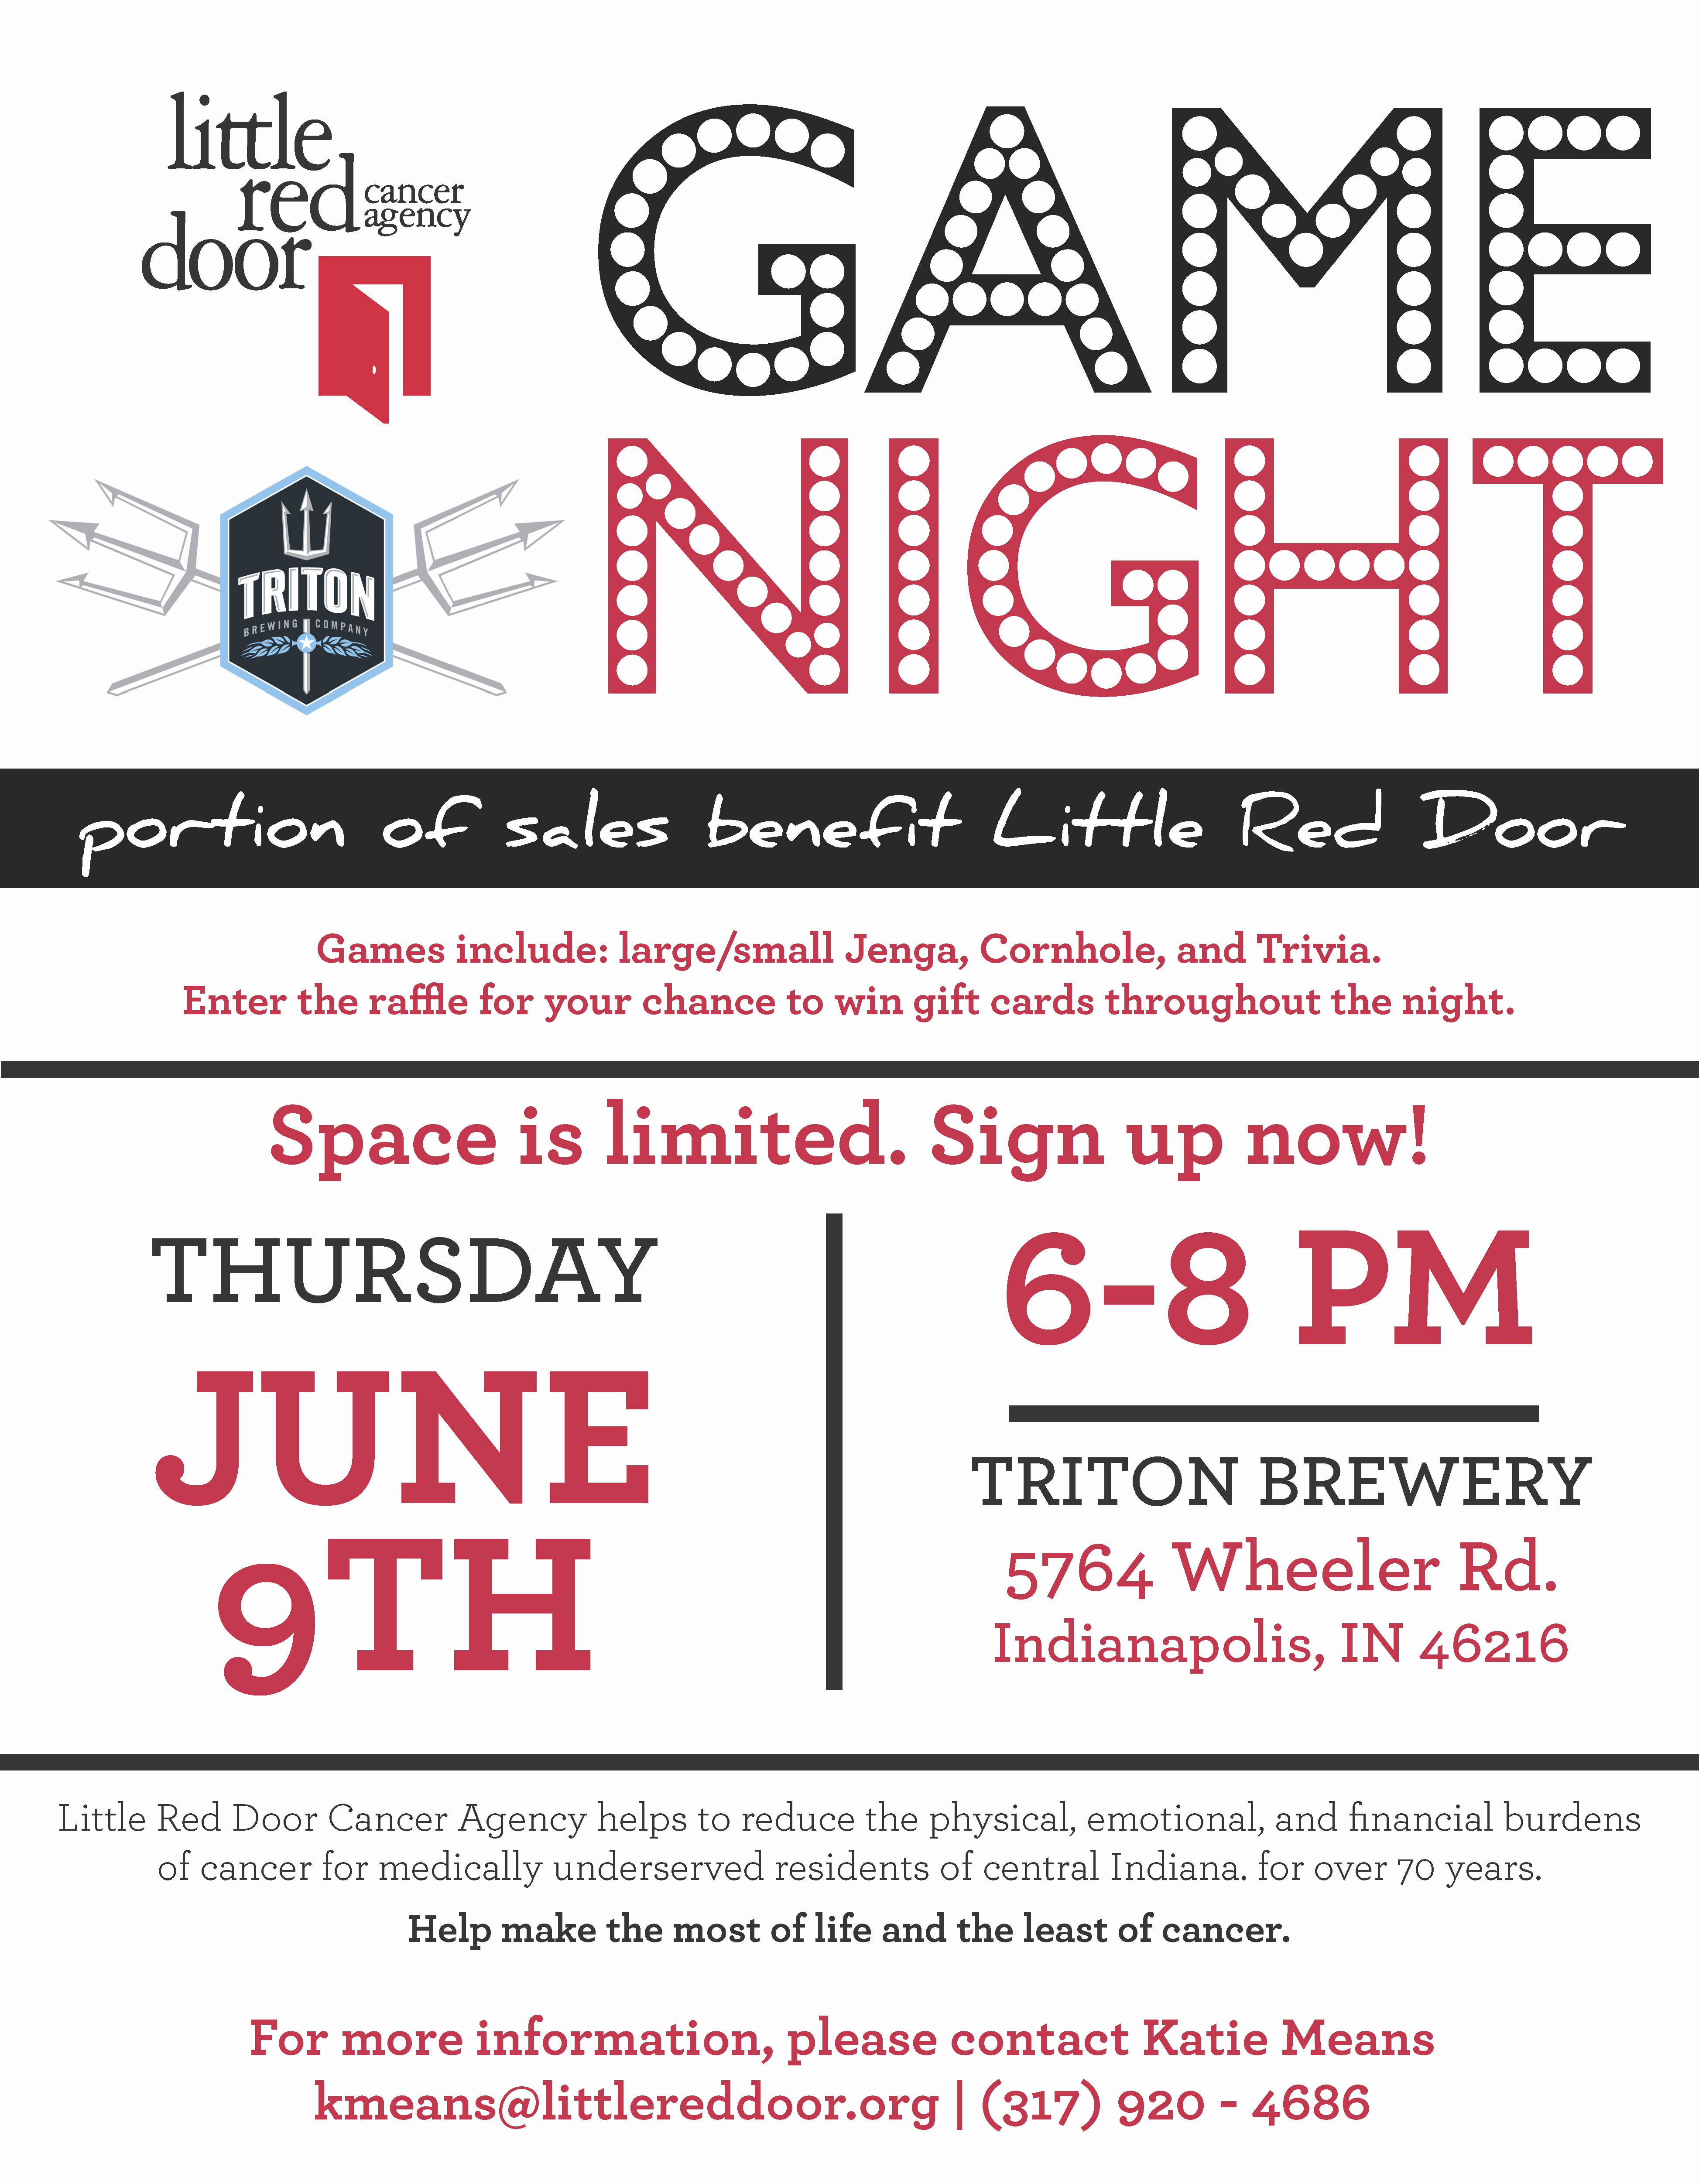 Board Game Night Flyer Template Fresh Game Night at Triton Brewery Little Red Door